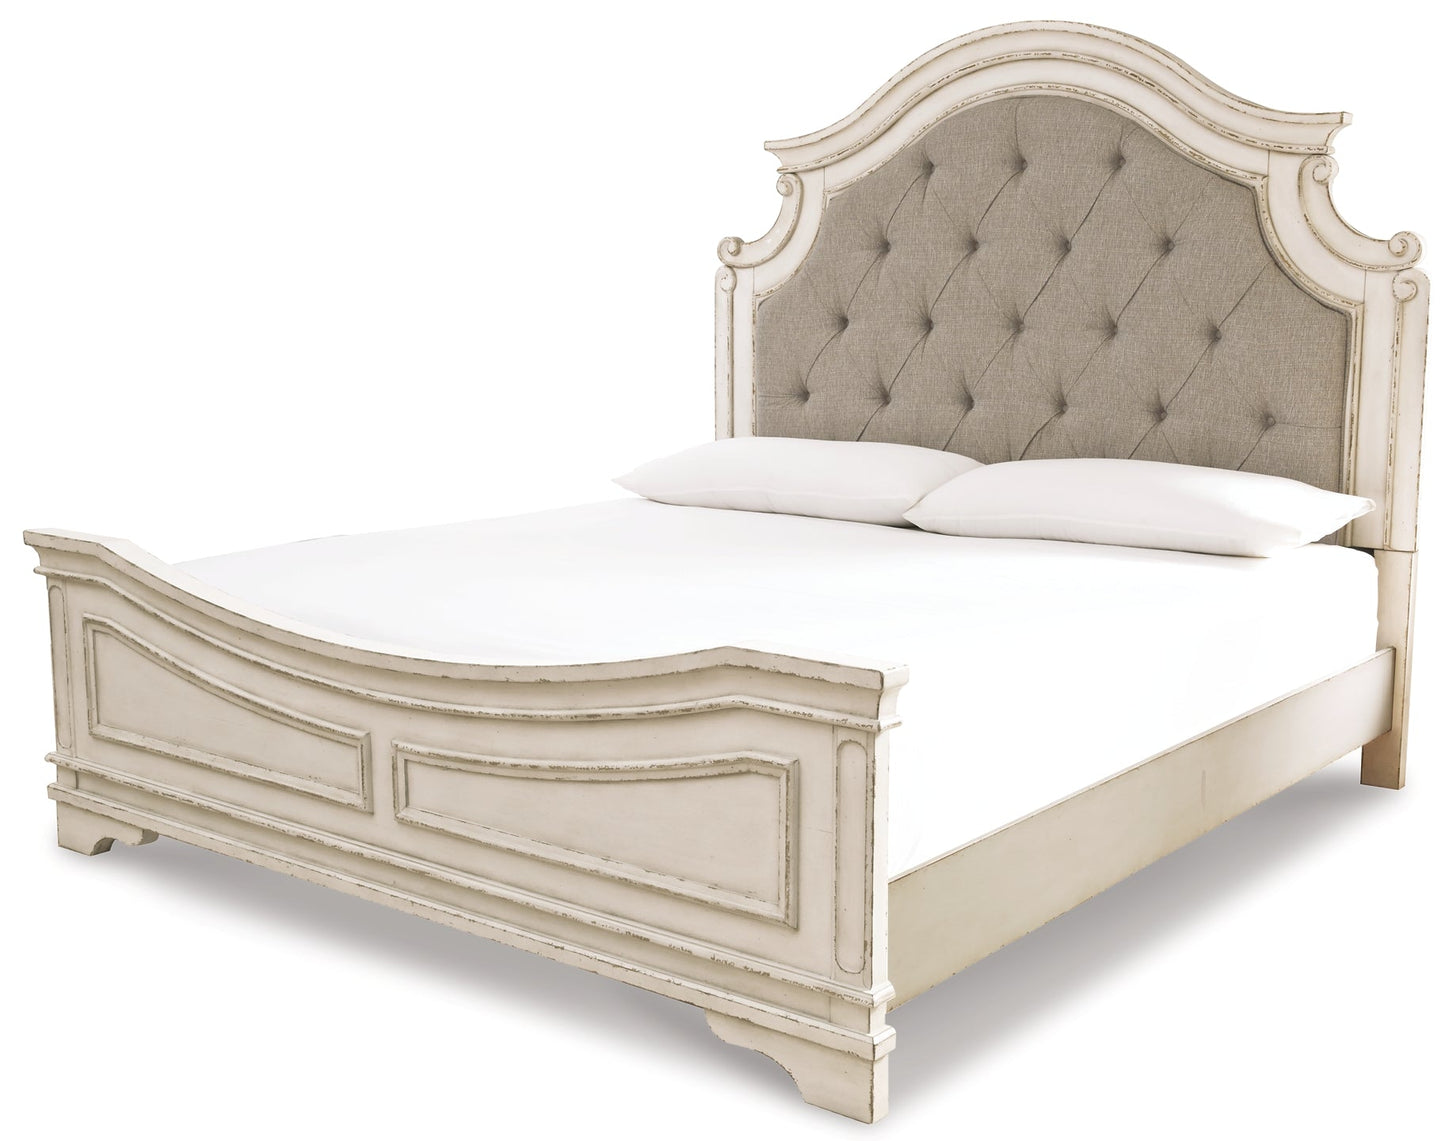 Realyn Queen Upholstered Panel Bed with Mirrored Dresser, Chest and Nightstand at Walker Mattress and Furniture Locations in Cedar Park and Belton TX.